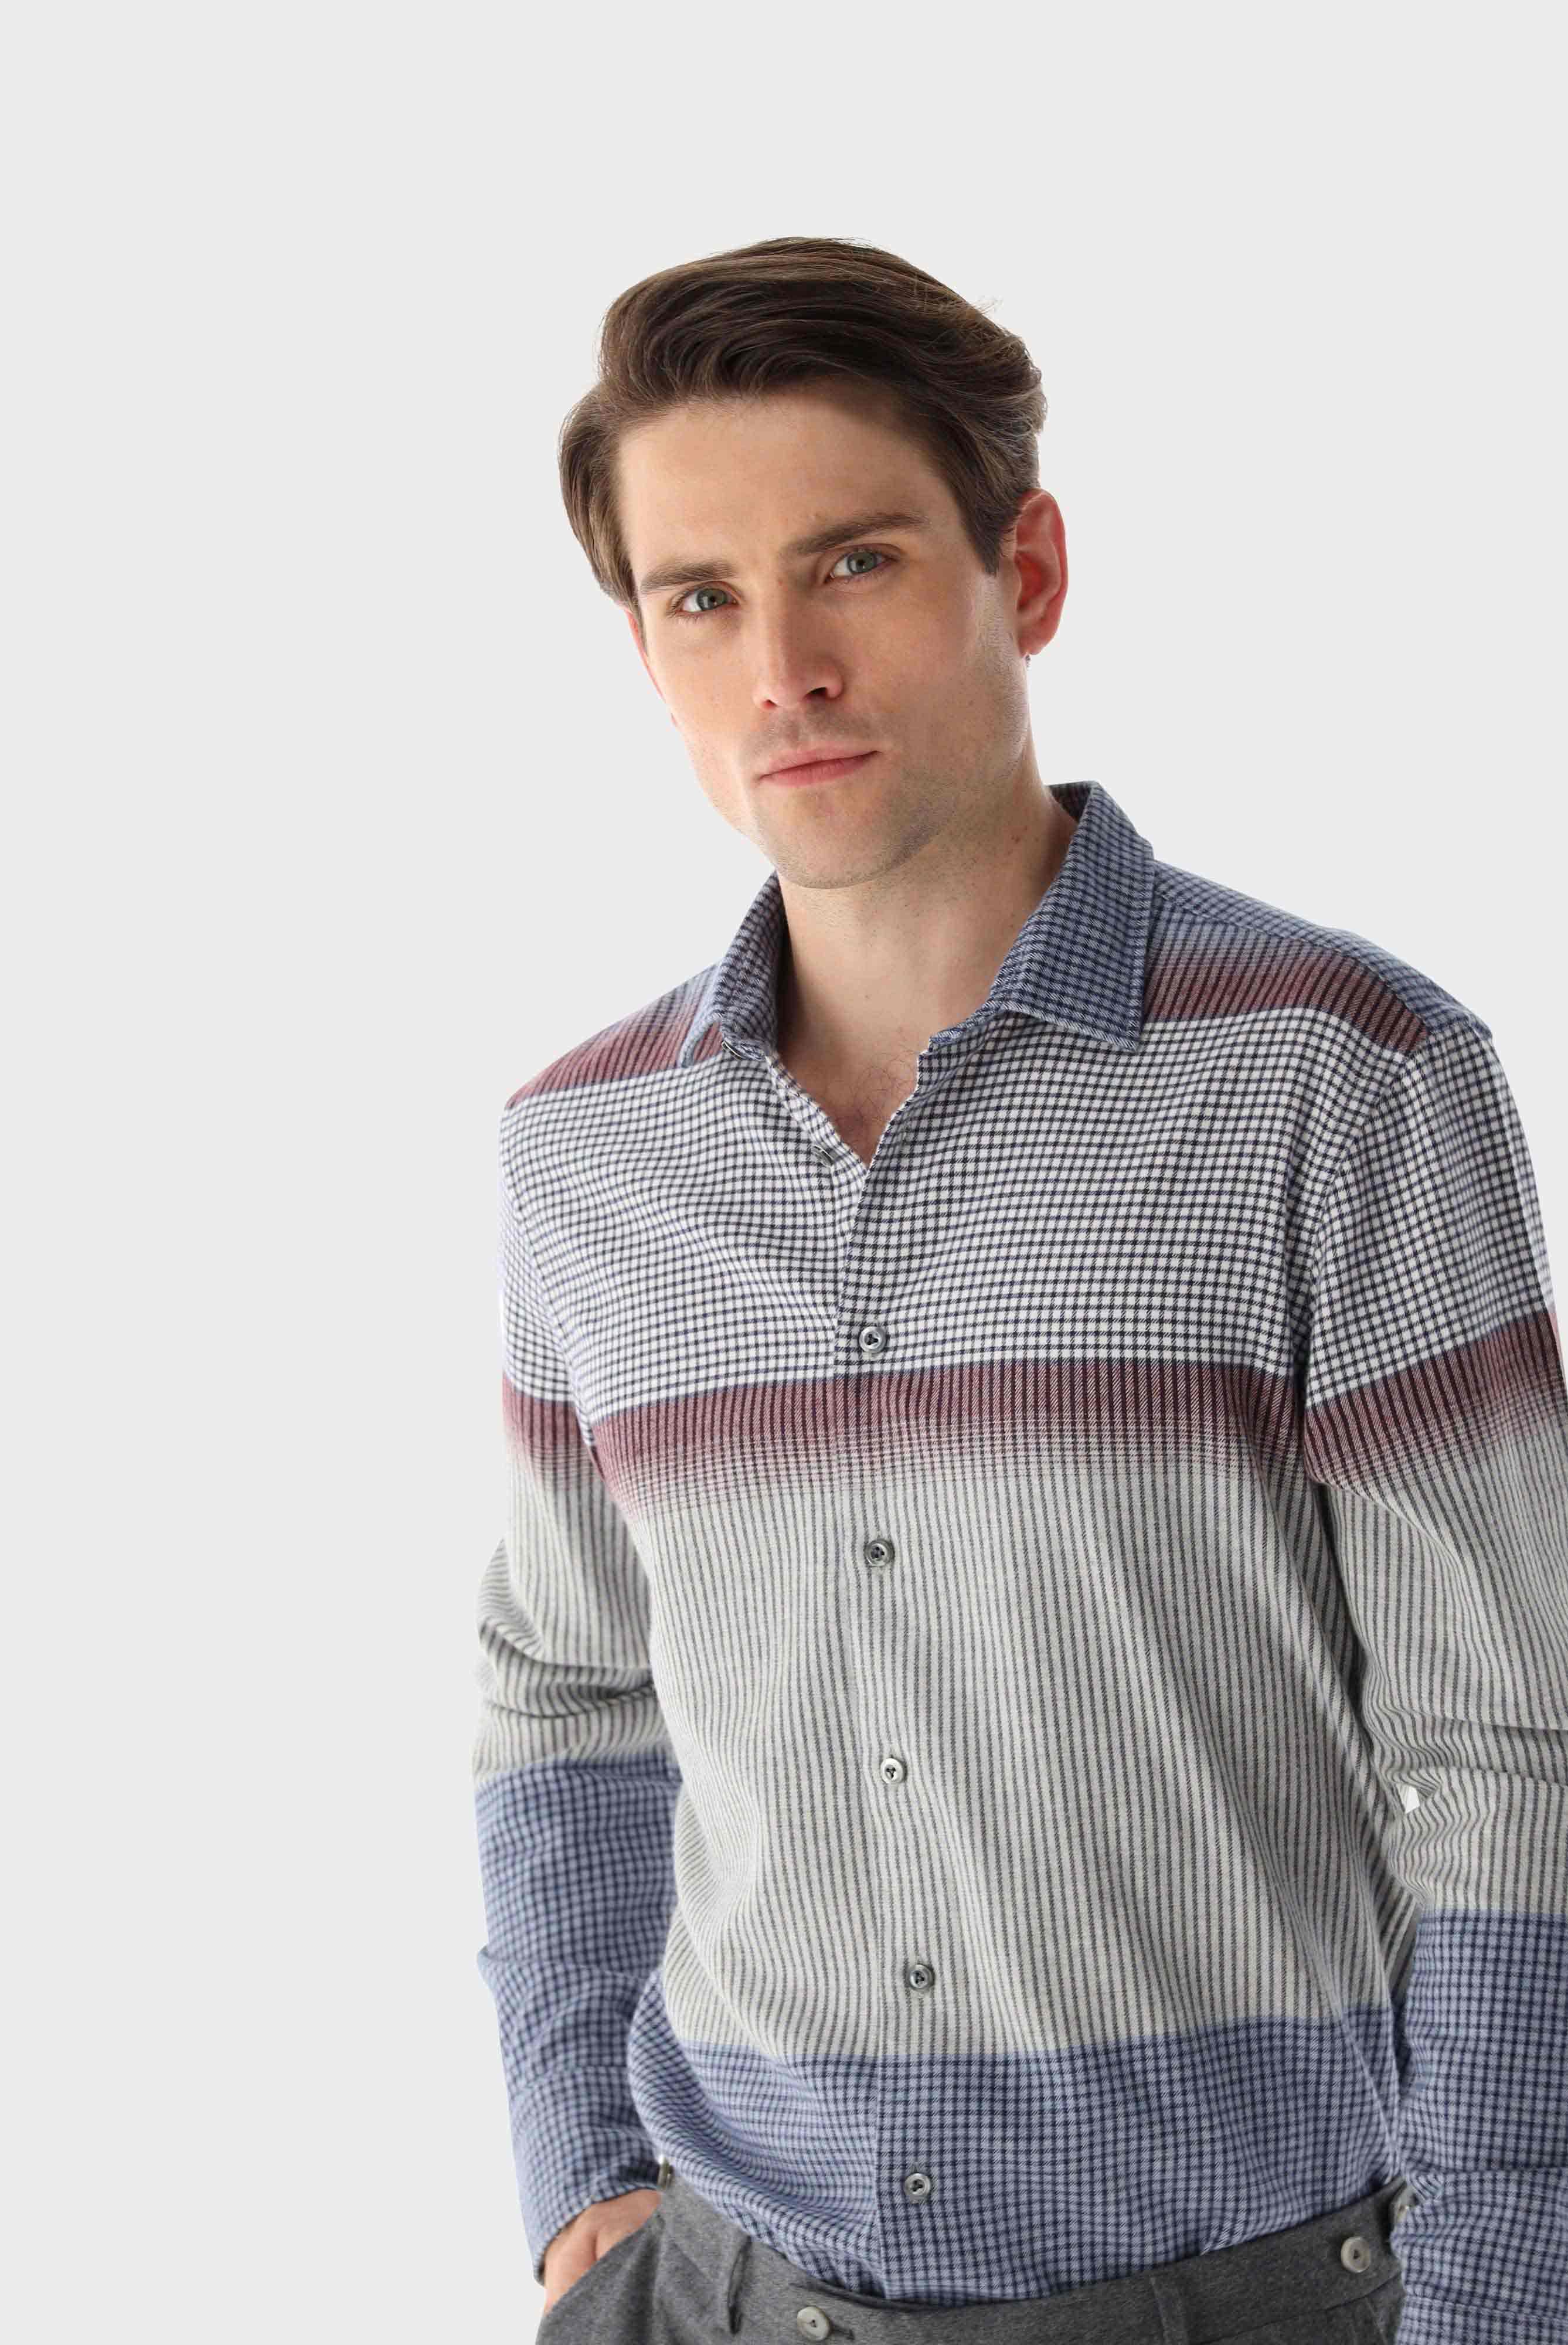 Casual Shirts+Graded-Multi-Checked Flanell Shirt+20.2010.8P.156434.795.38